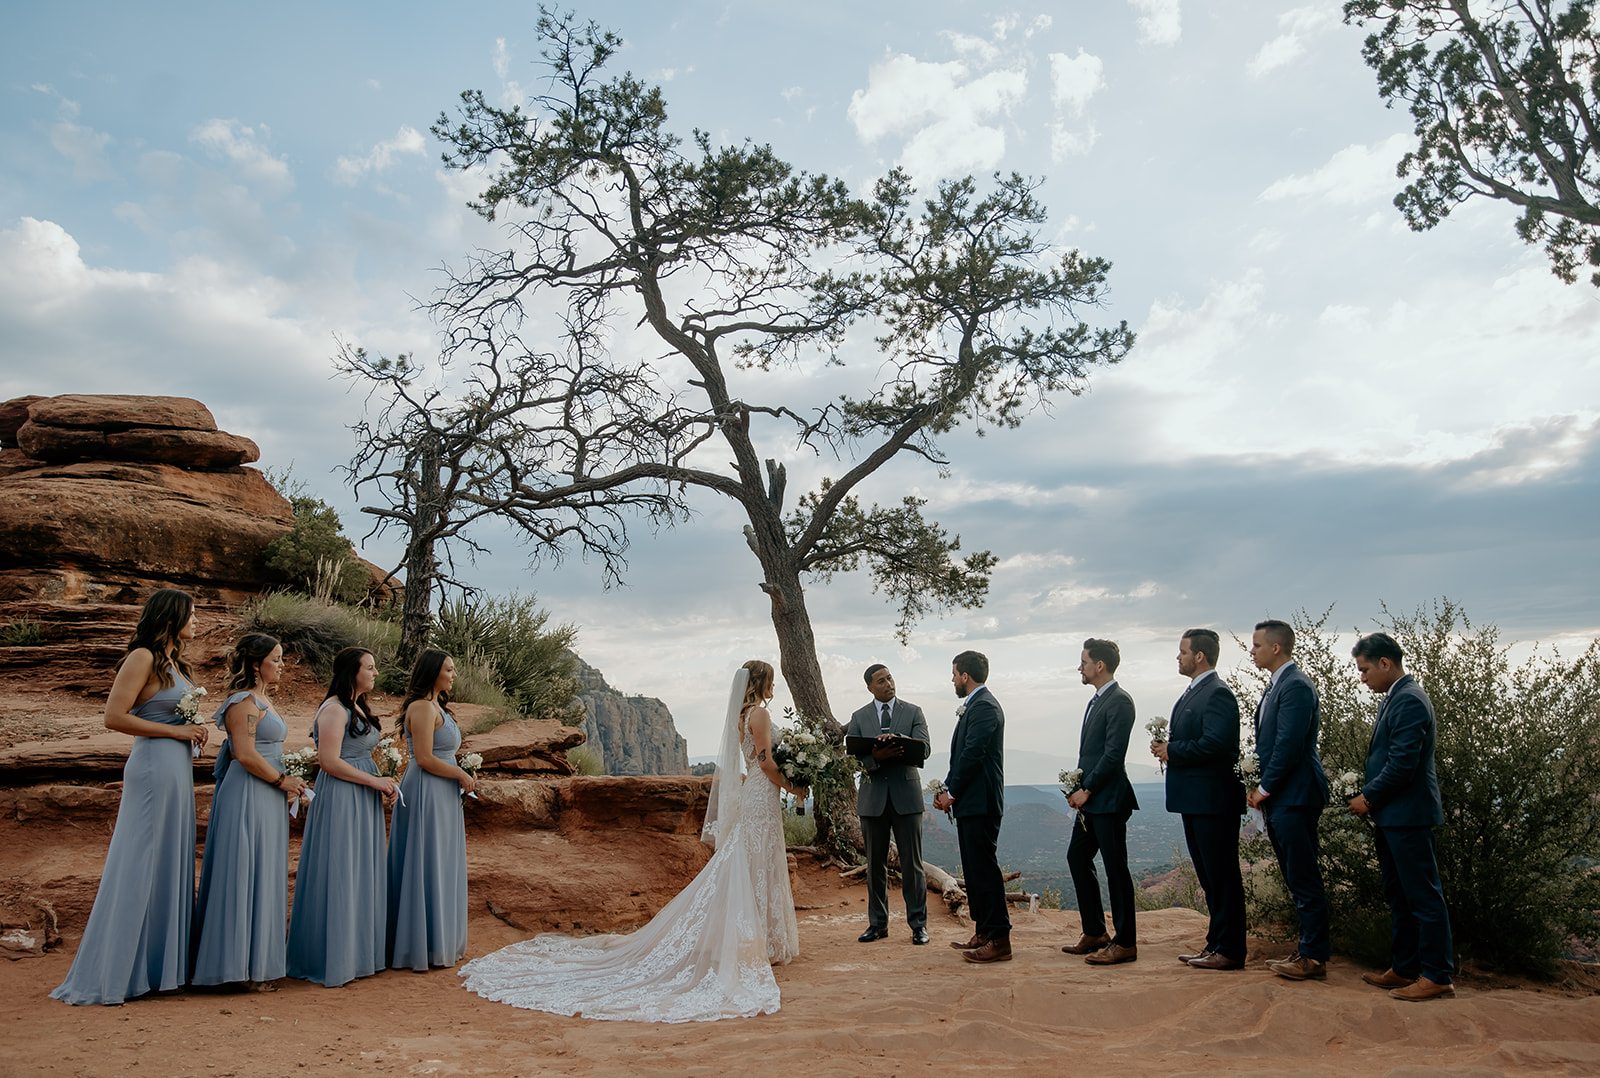 Bride and groom with their friends and family at their elopement in Sedona, arizona